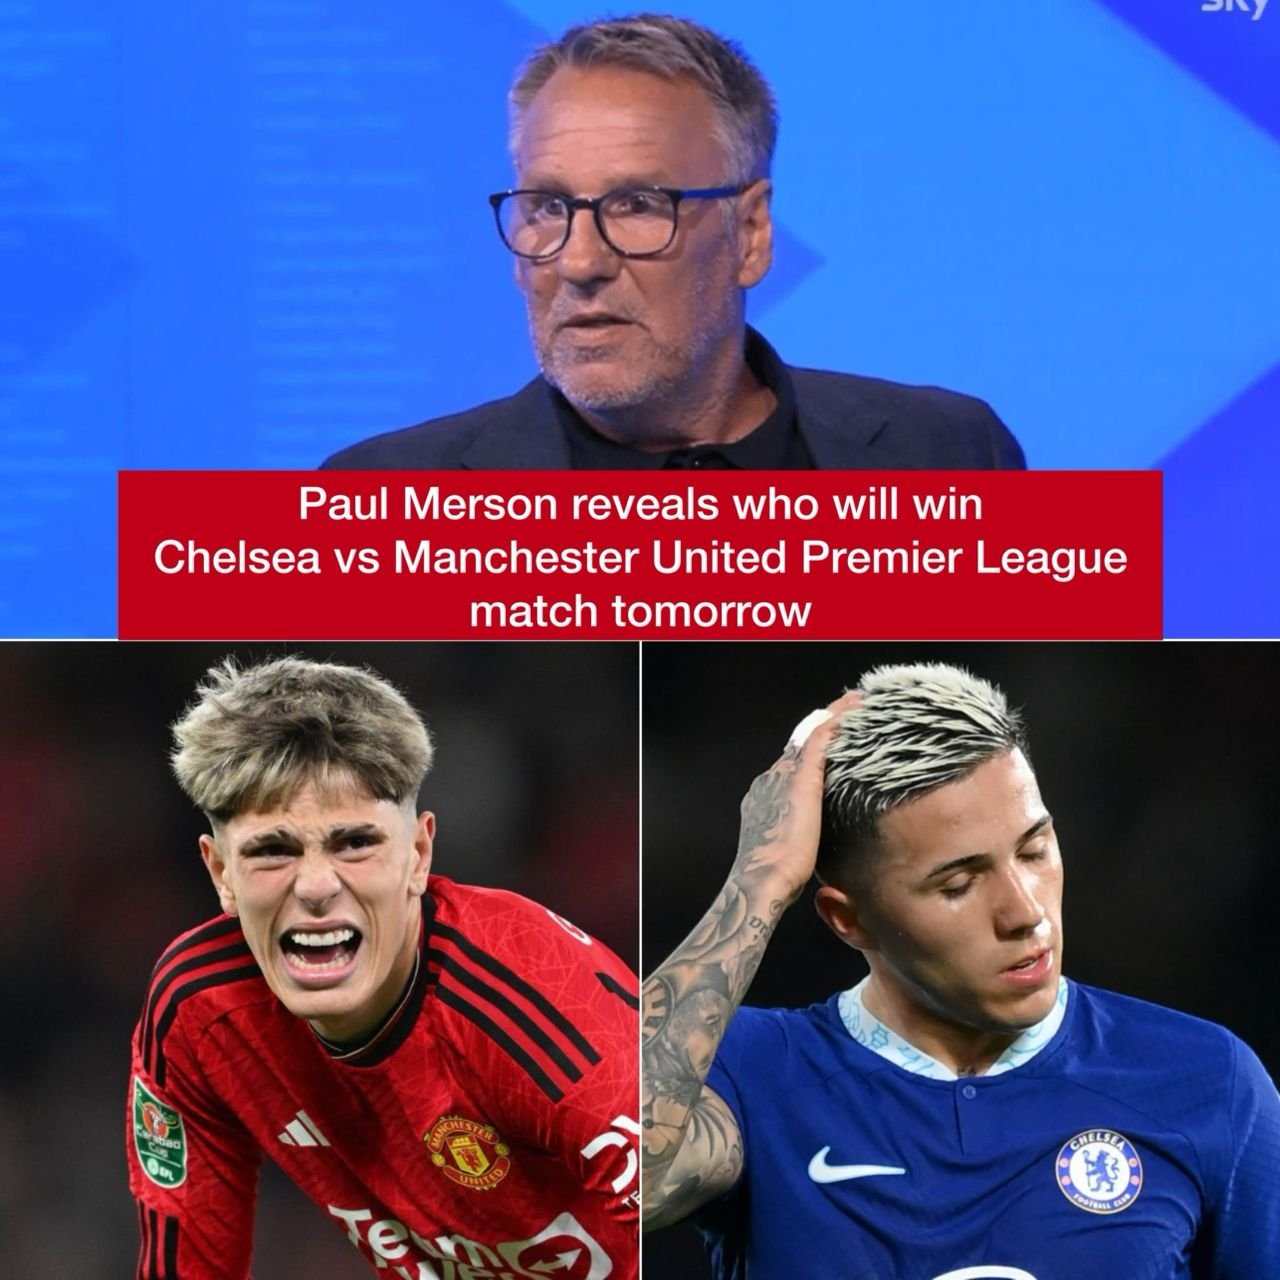 English pundit for Sky Sports Paul Merson reveals who will win Chelsea vs Manchester United Premier League match tomorrow